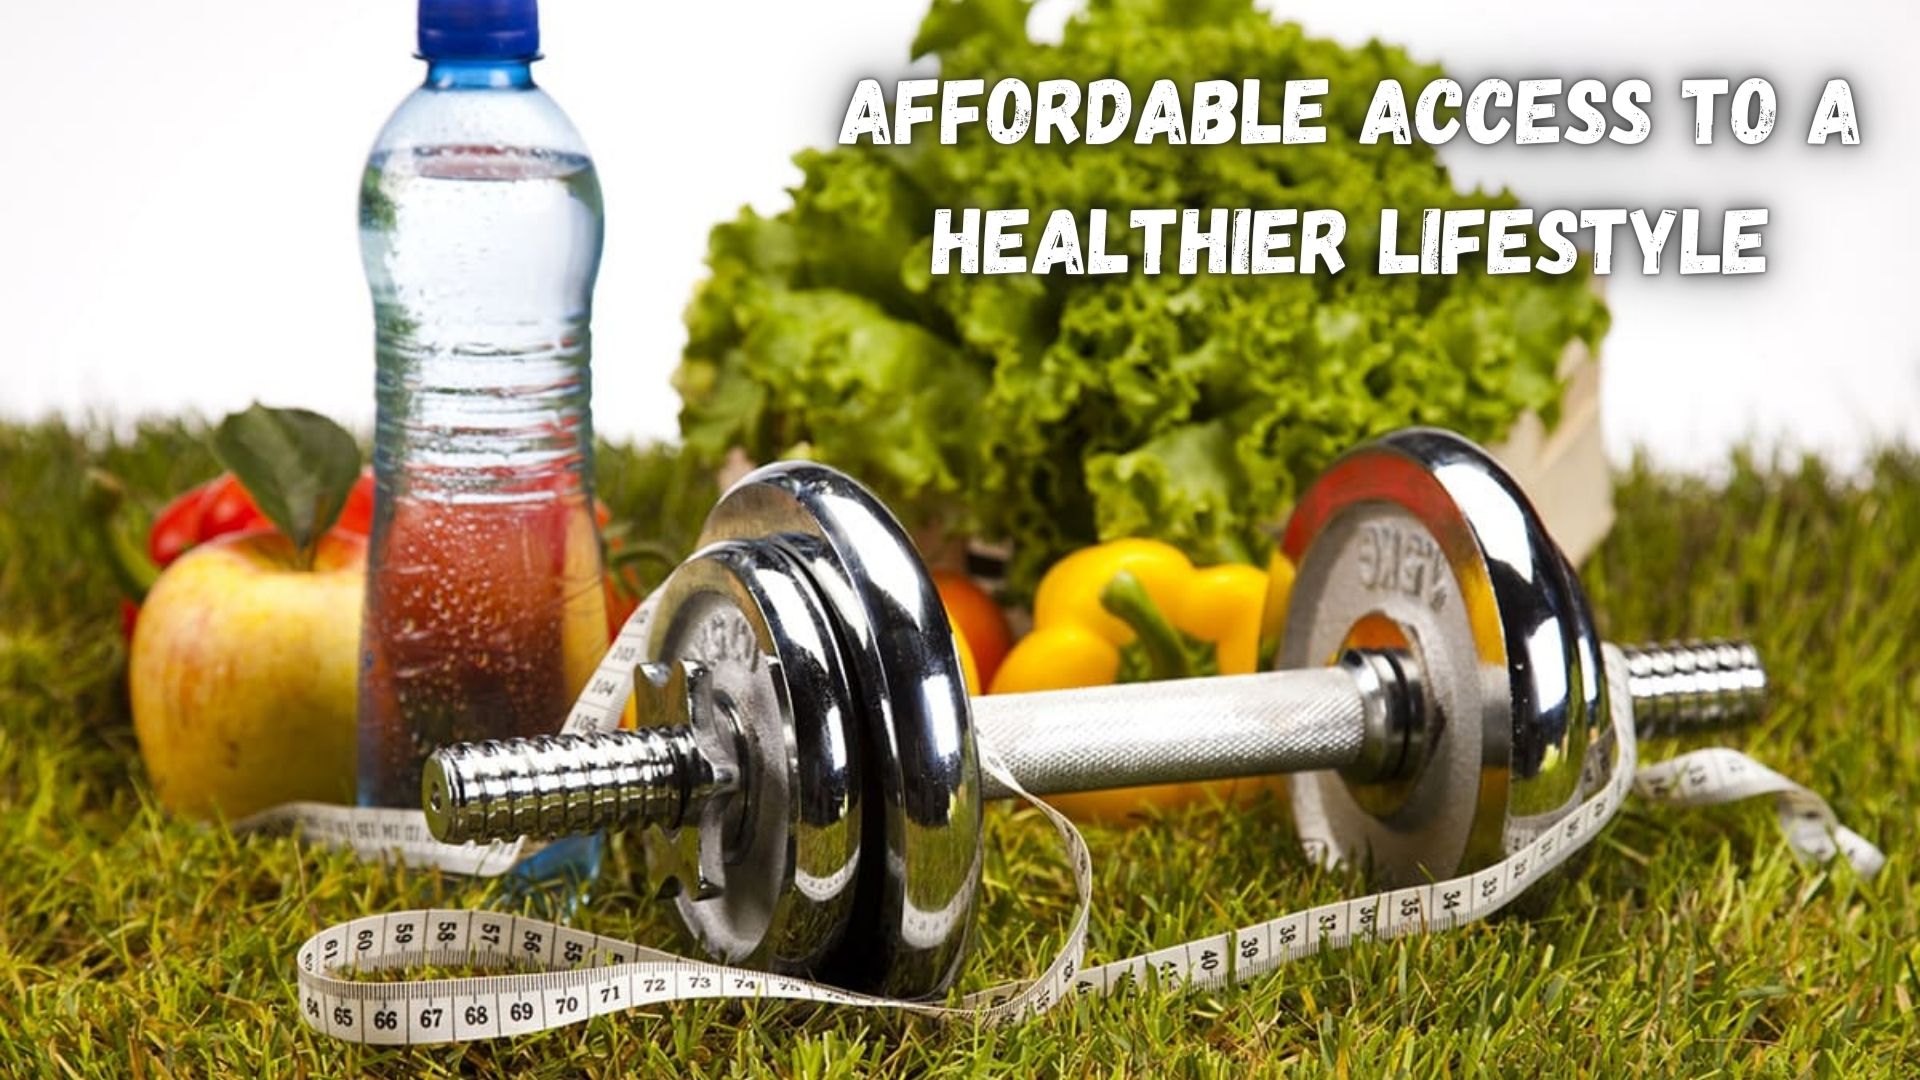 Affordable Access to a Healthier Lifestyle.